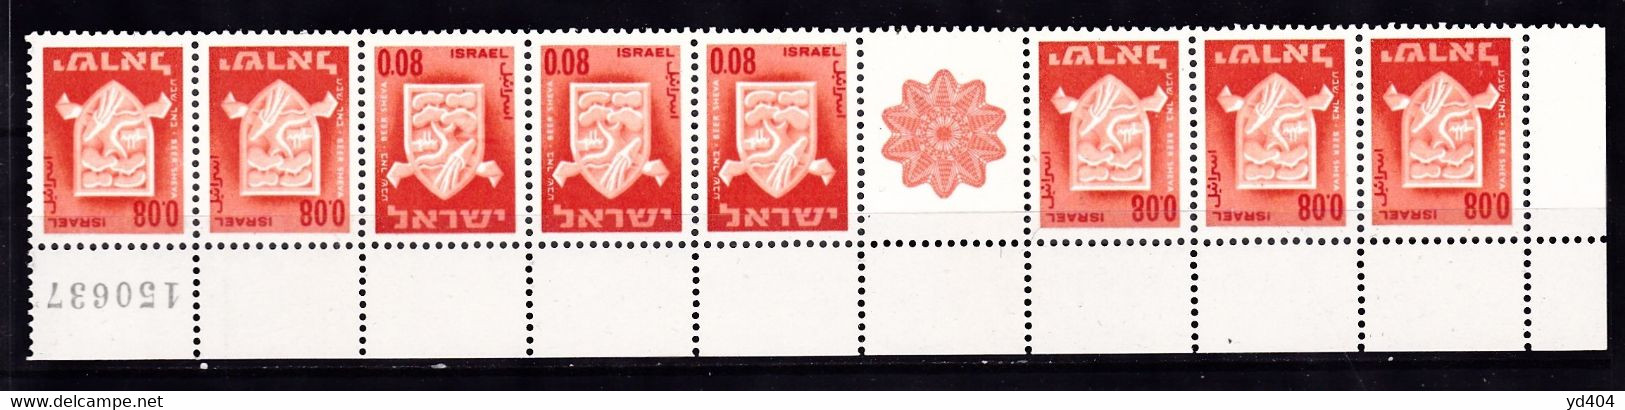 IL57- ISRAEL – 1966 – CURRENT ISSUES FOR BOOKLETS – Y&T # 275a/b MNH - Cuadernillos